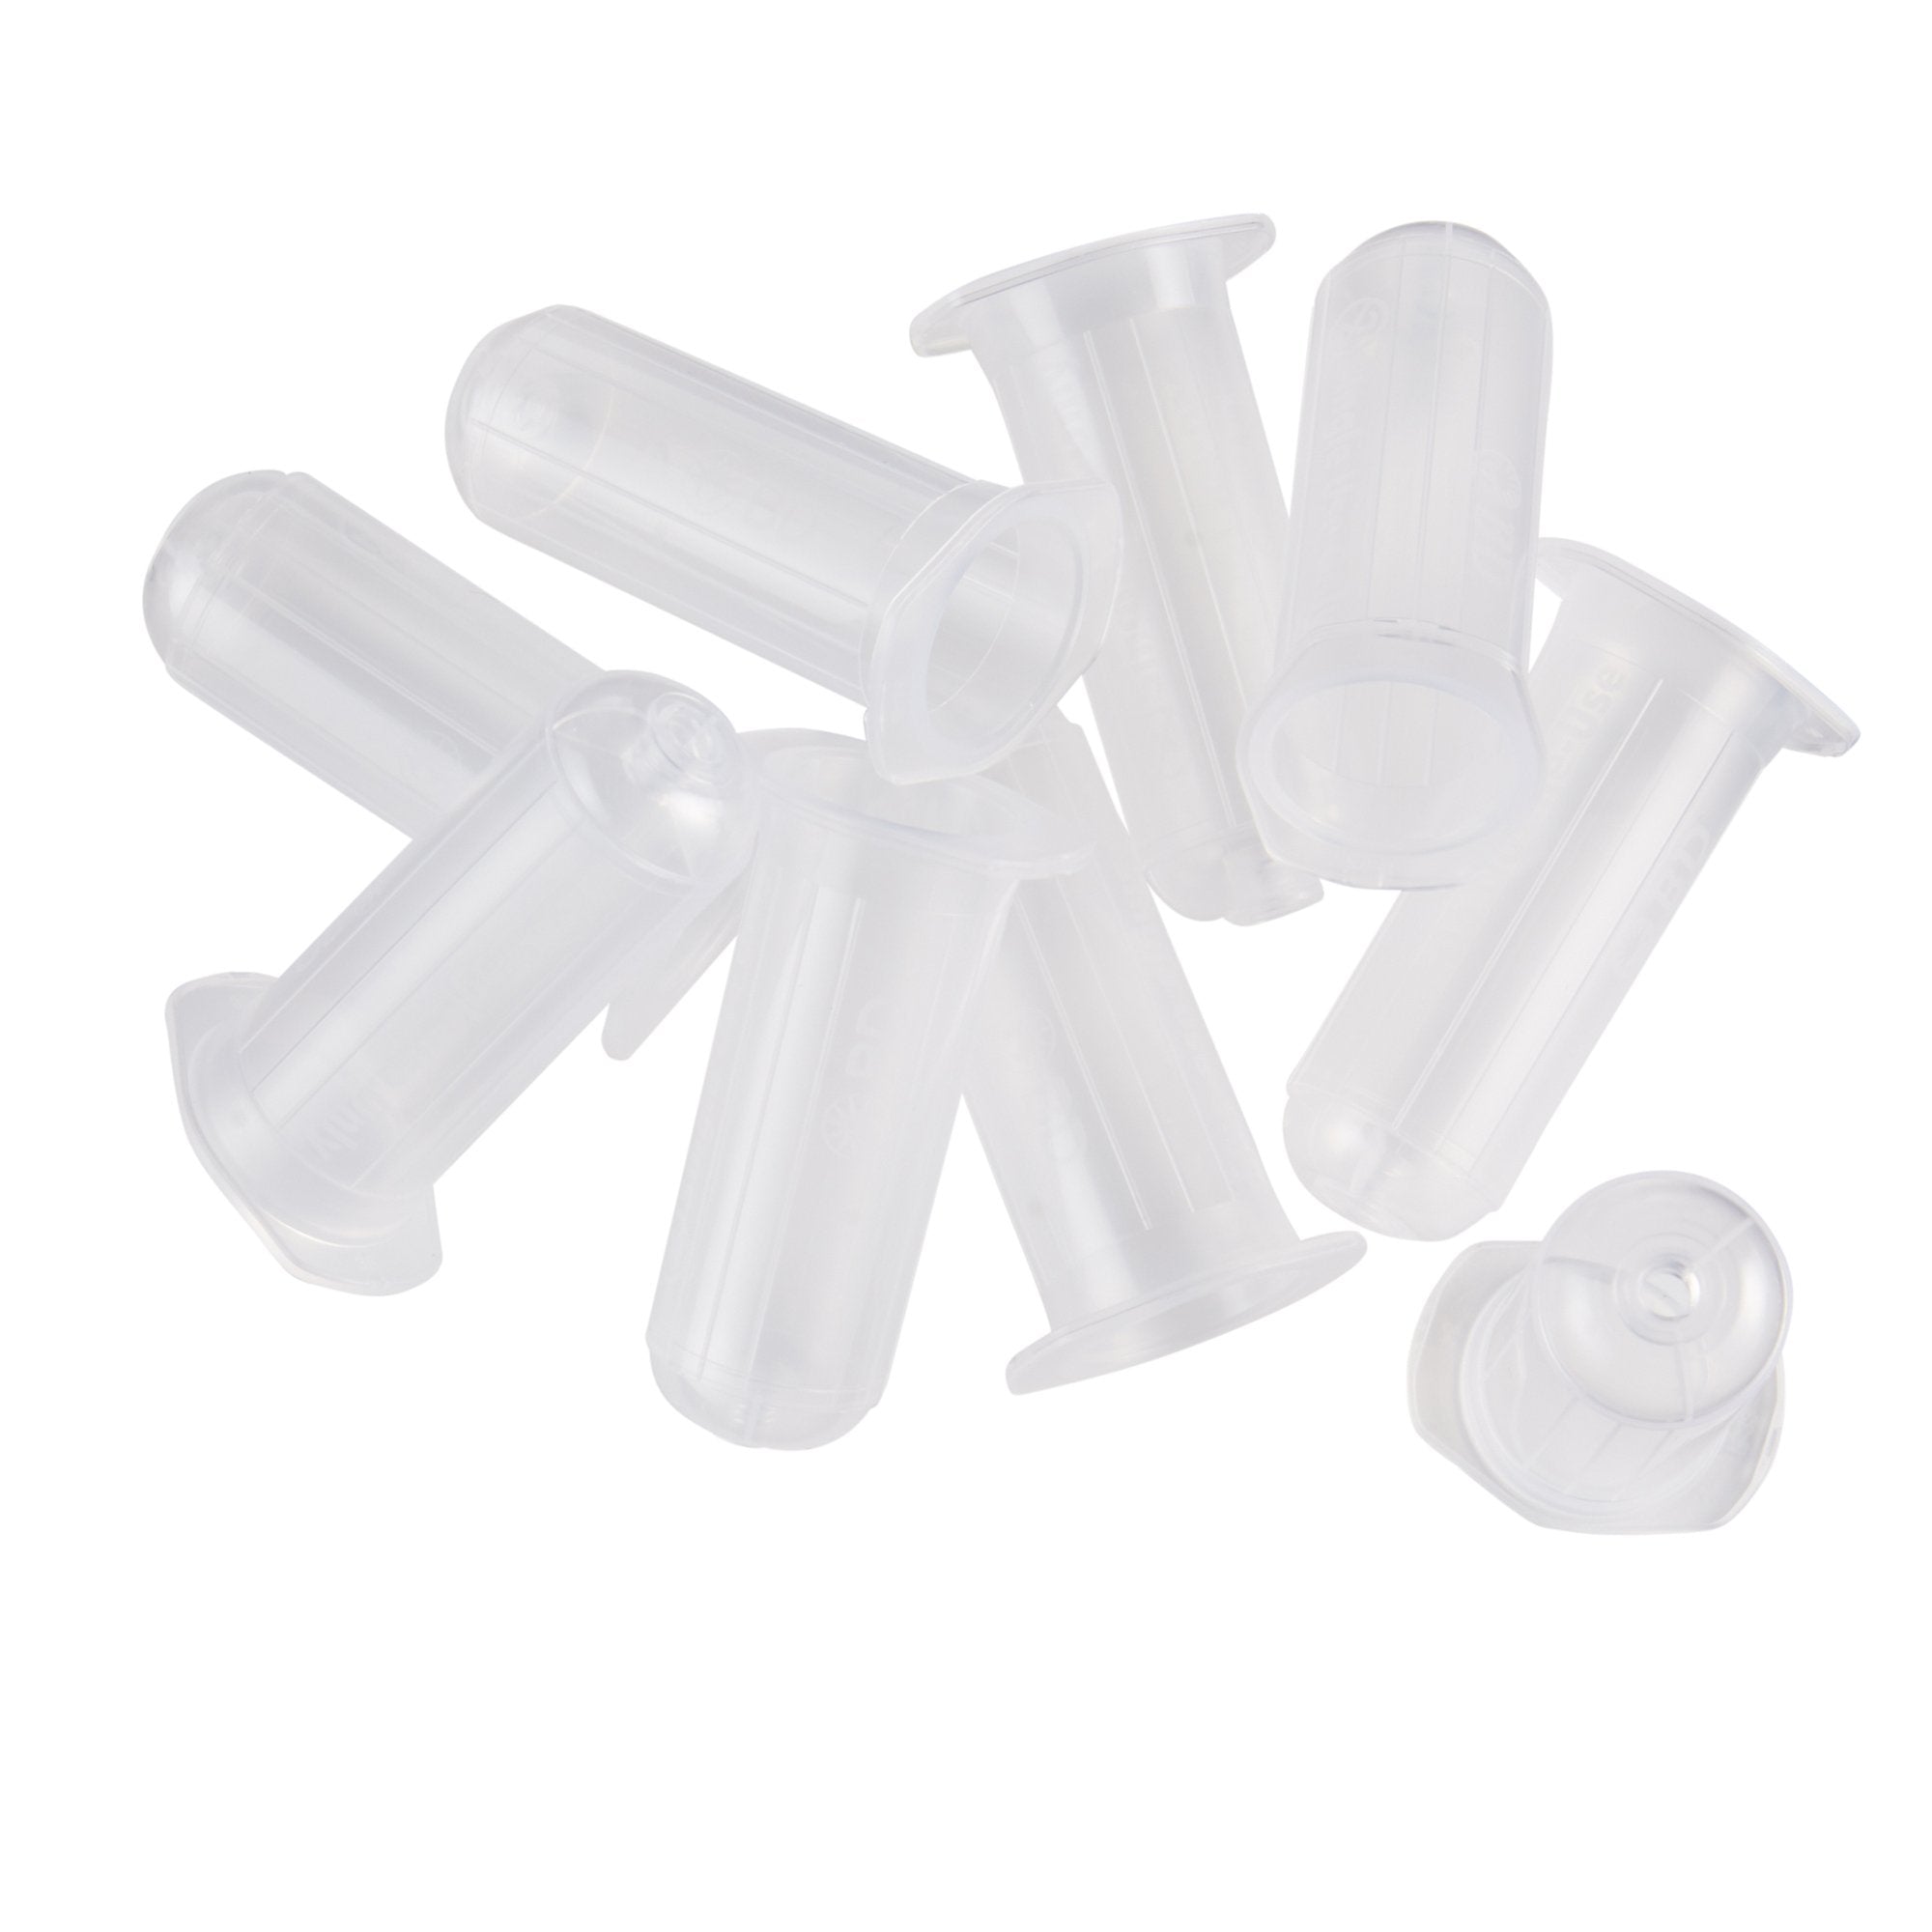 Tube Holder BD Vacutainer Standard Size, Clear, Non-Stackable, Single Use, 250 / Shelf Pack For 13 mm and 16 Diameter Tubes